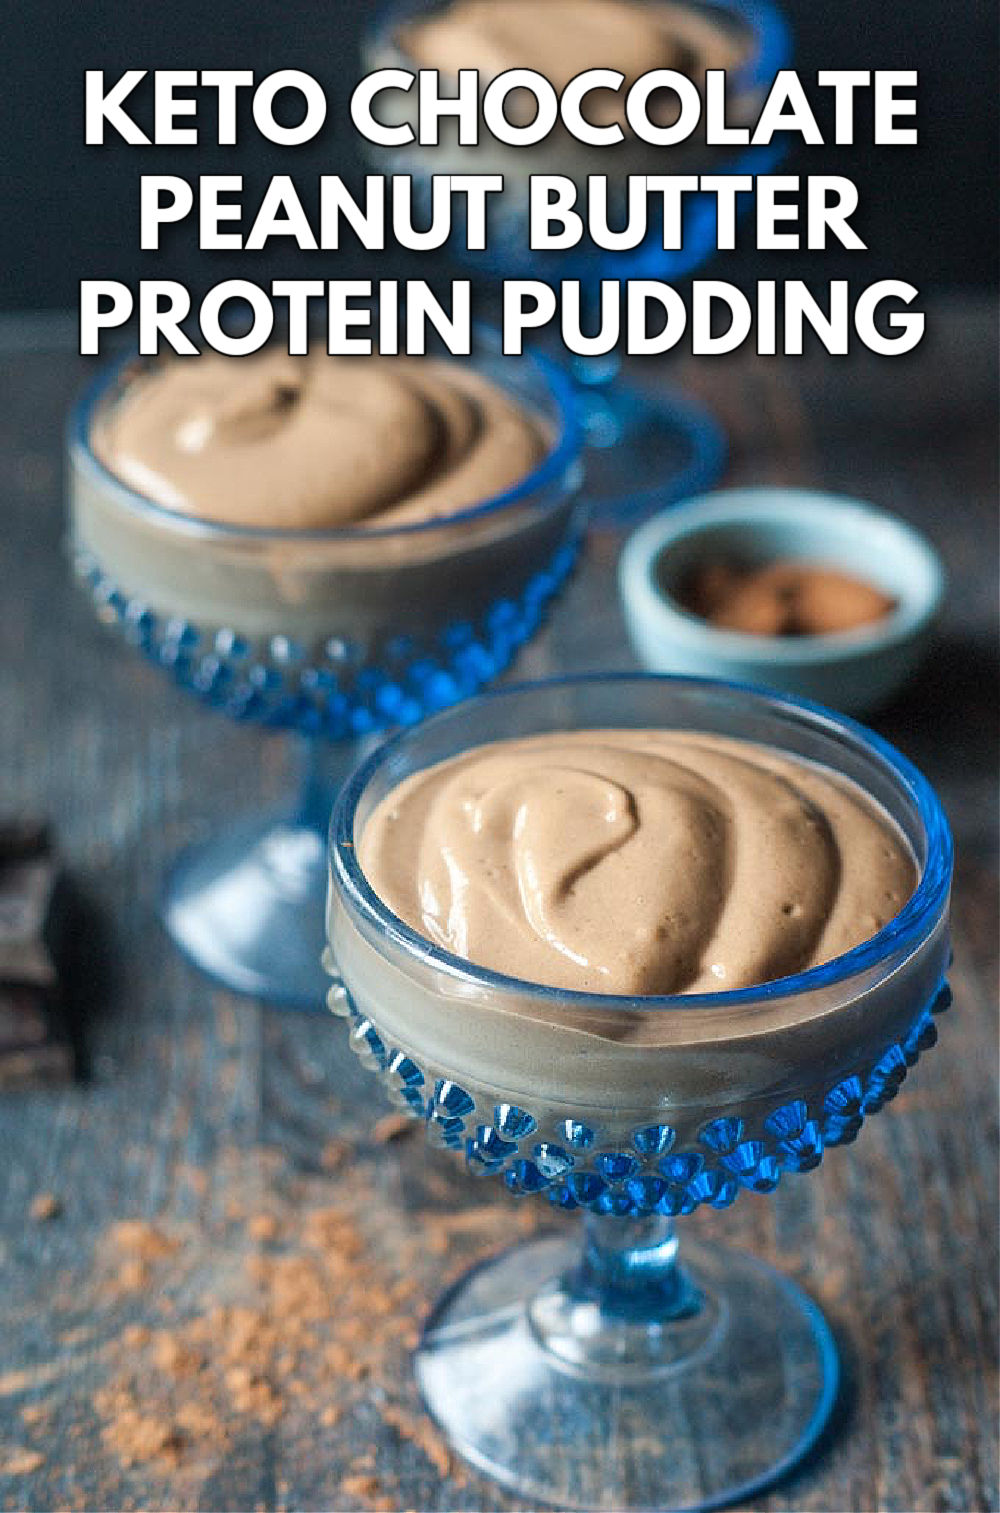 closeup of a blue dessert dish with keto peanut butter chocolate protein pudding with text